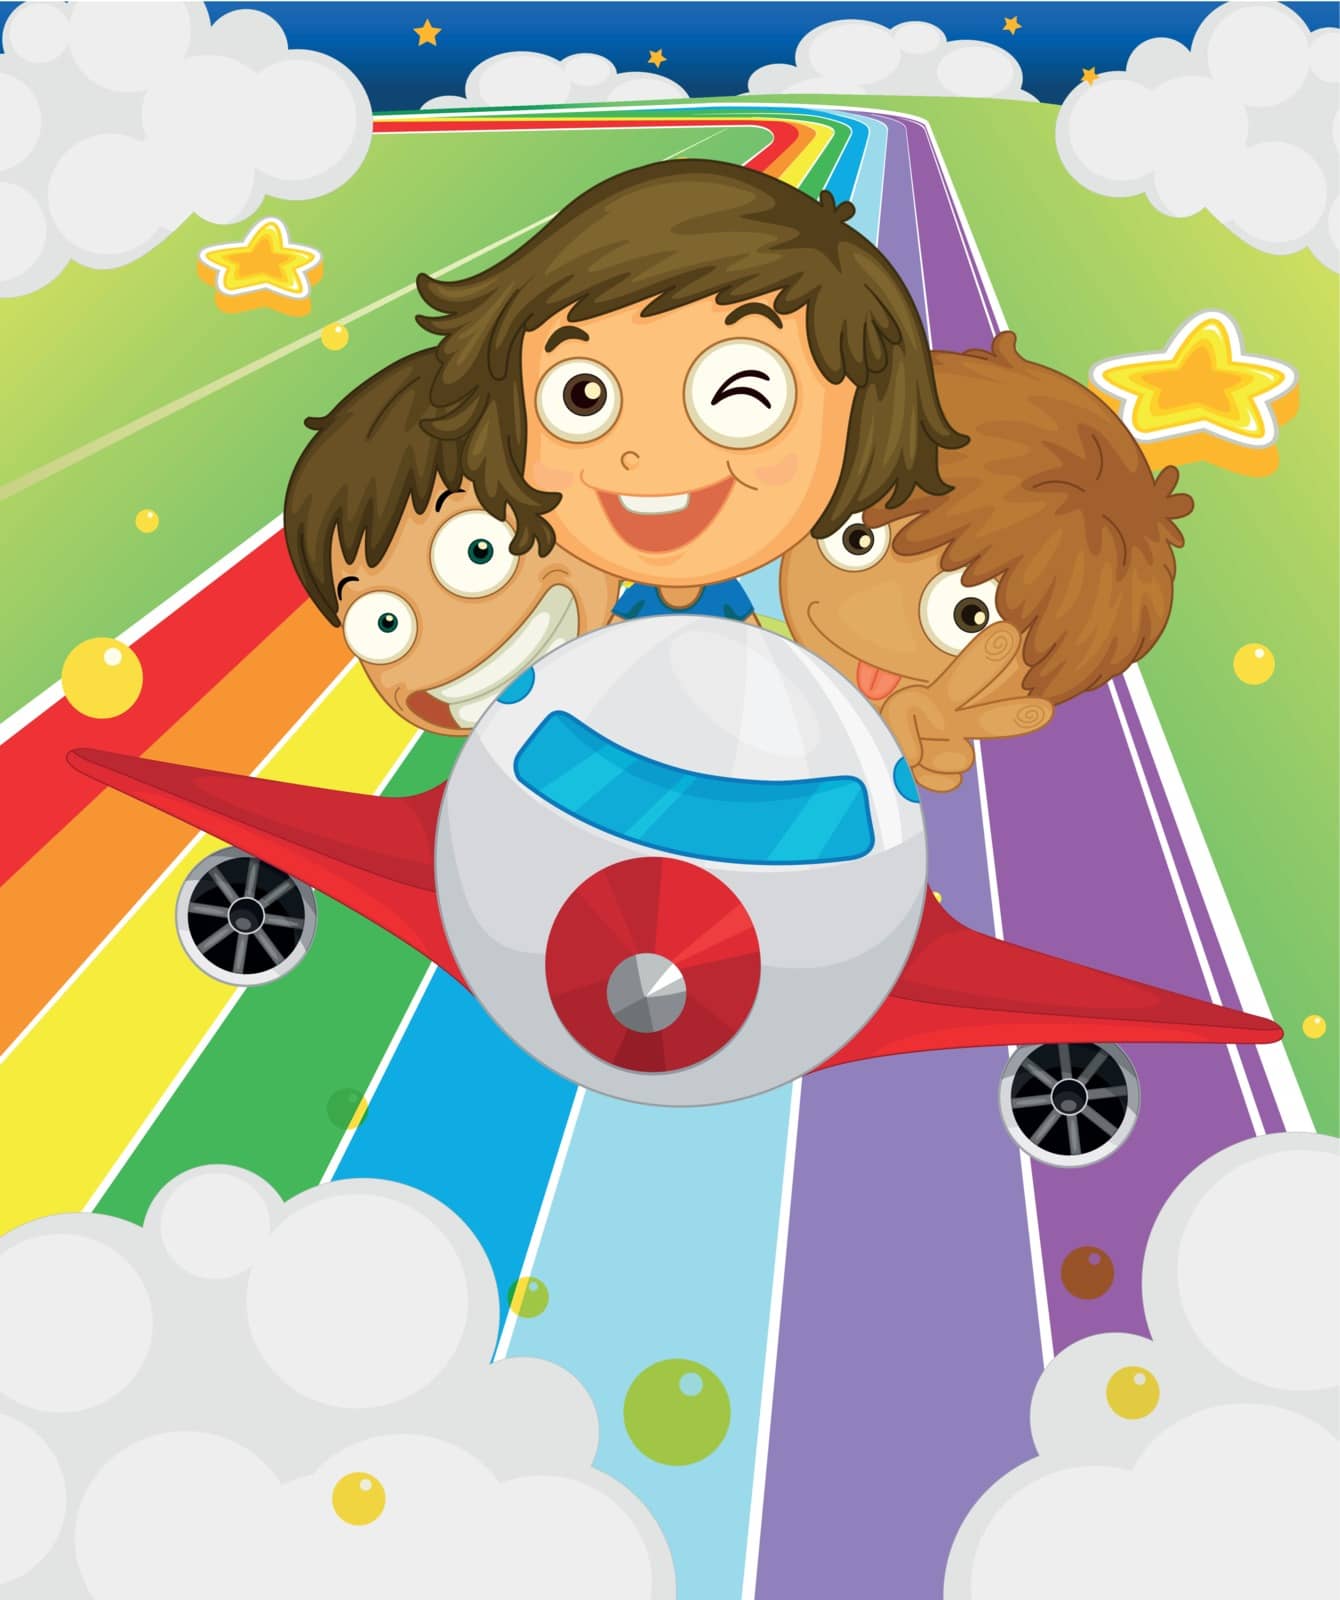 Illustration of a plane with three playful kids